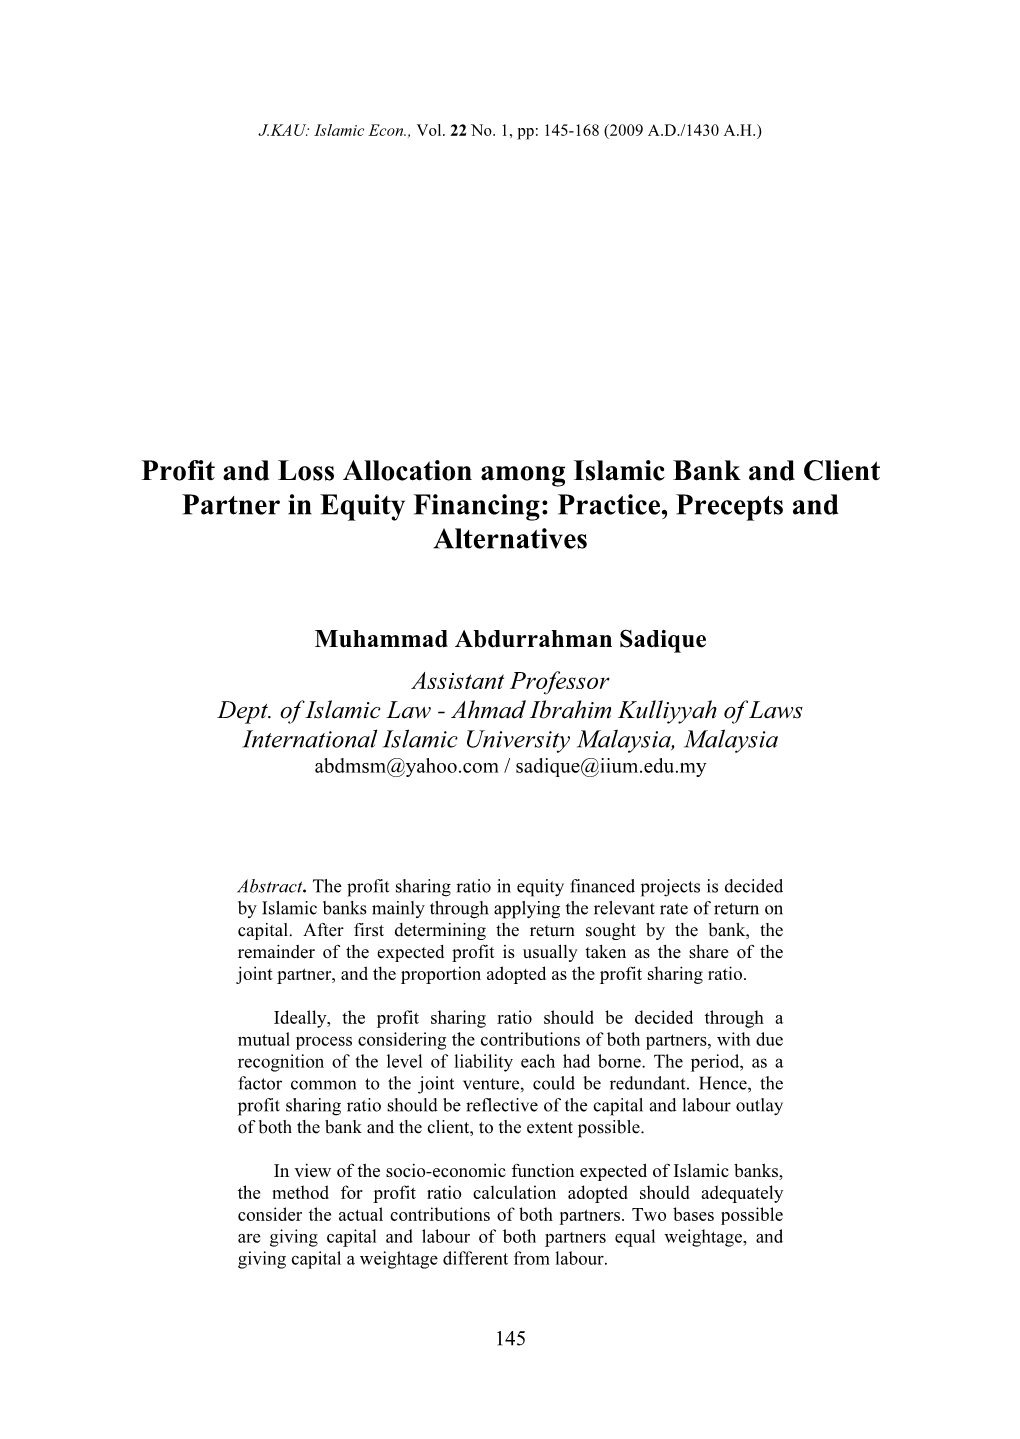 Profit and Loss Allocation Among Islamic Bank and Client Partner in Equity Financing: Practice, Precepts and Alternatives